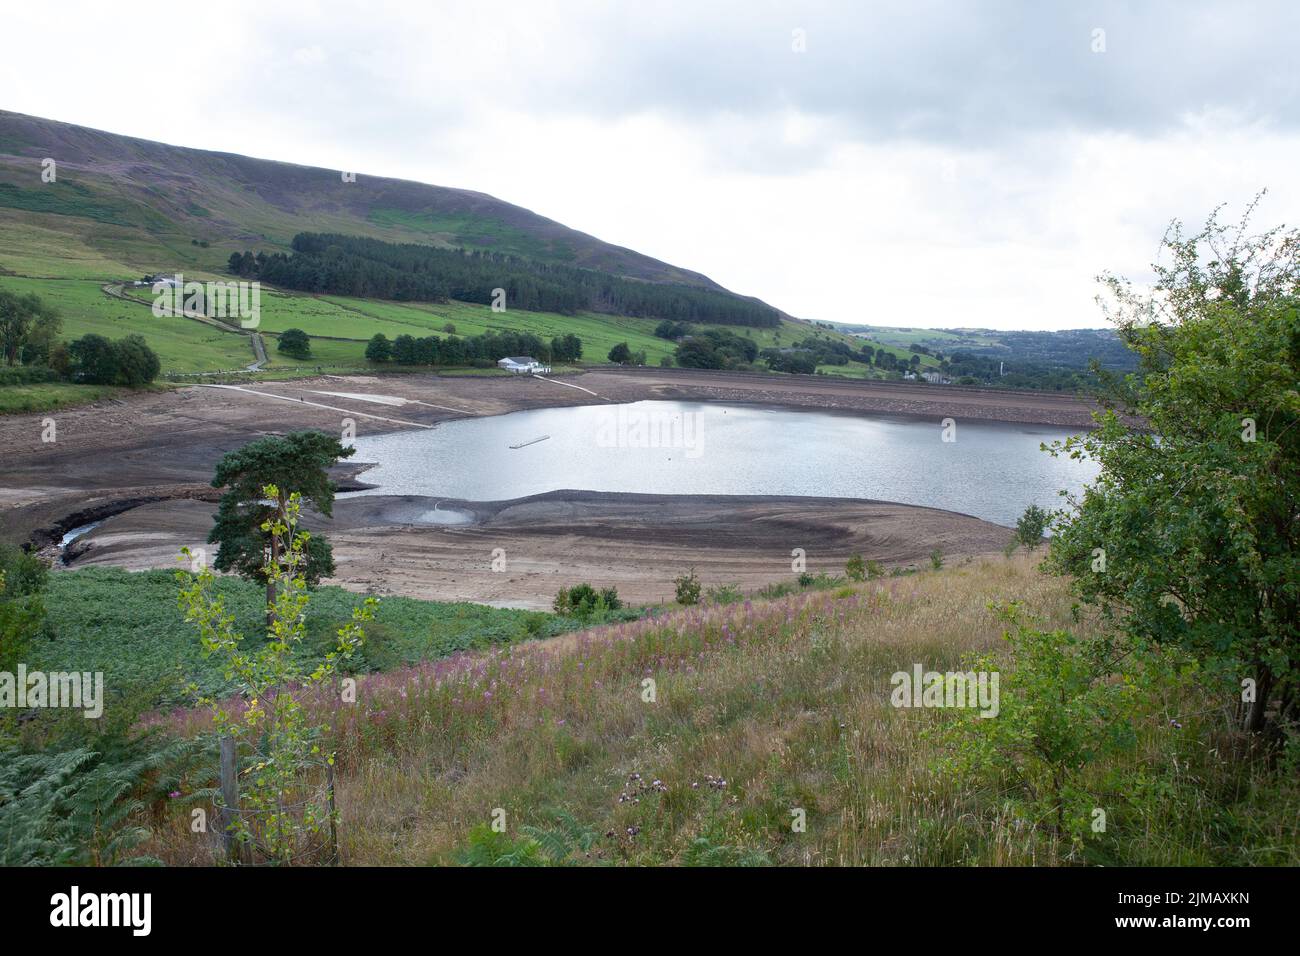 UK Weather 5.8.2022 Dovestone Reservoir Greenfield Saddleworth UK The lack of rainfall over recent weeks has left Dovestone Reservoir at an alarmingly low level of water revealing rocks that are usually unseen. Credit: Peter Liggins/Alamy Live News Stock Photo